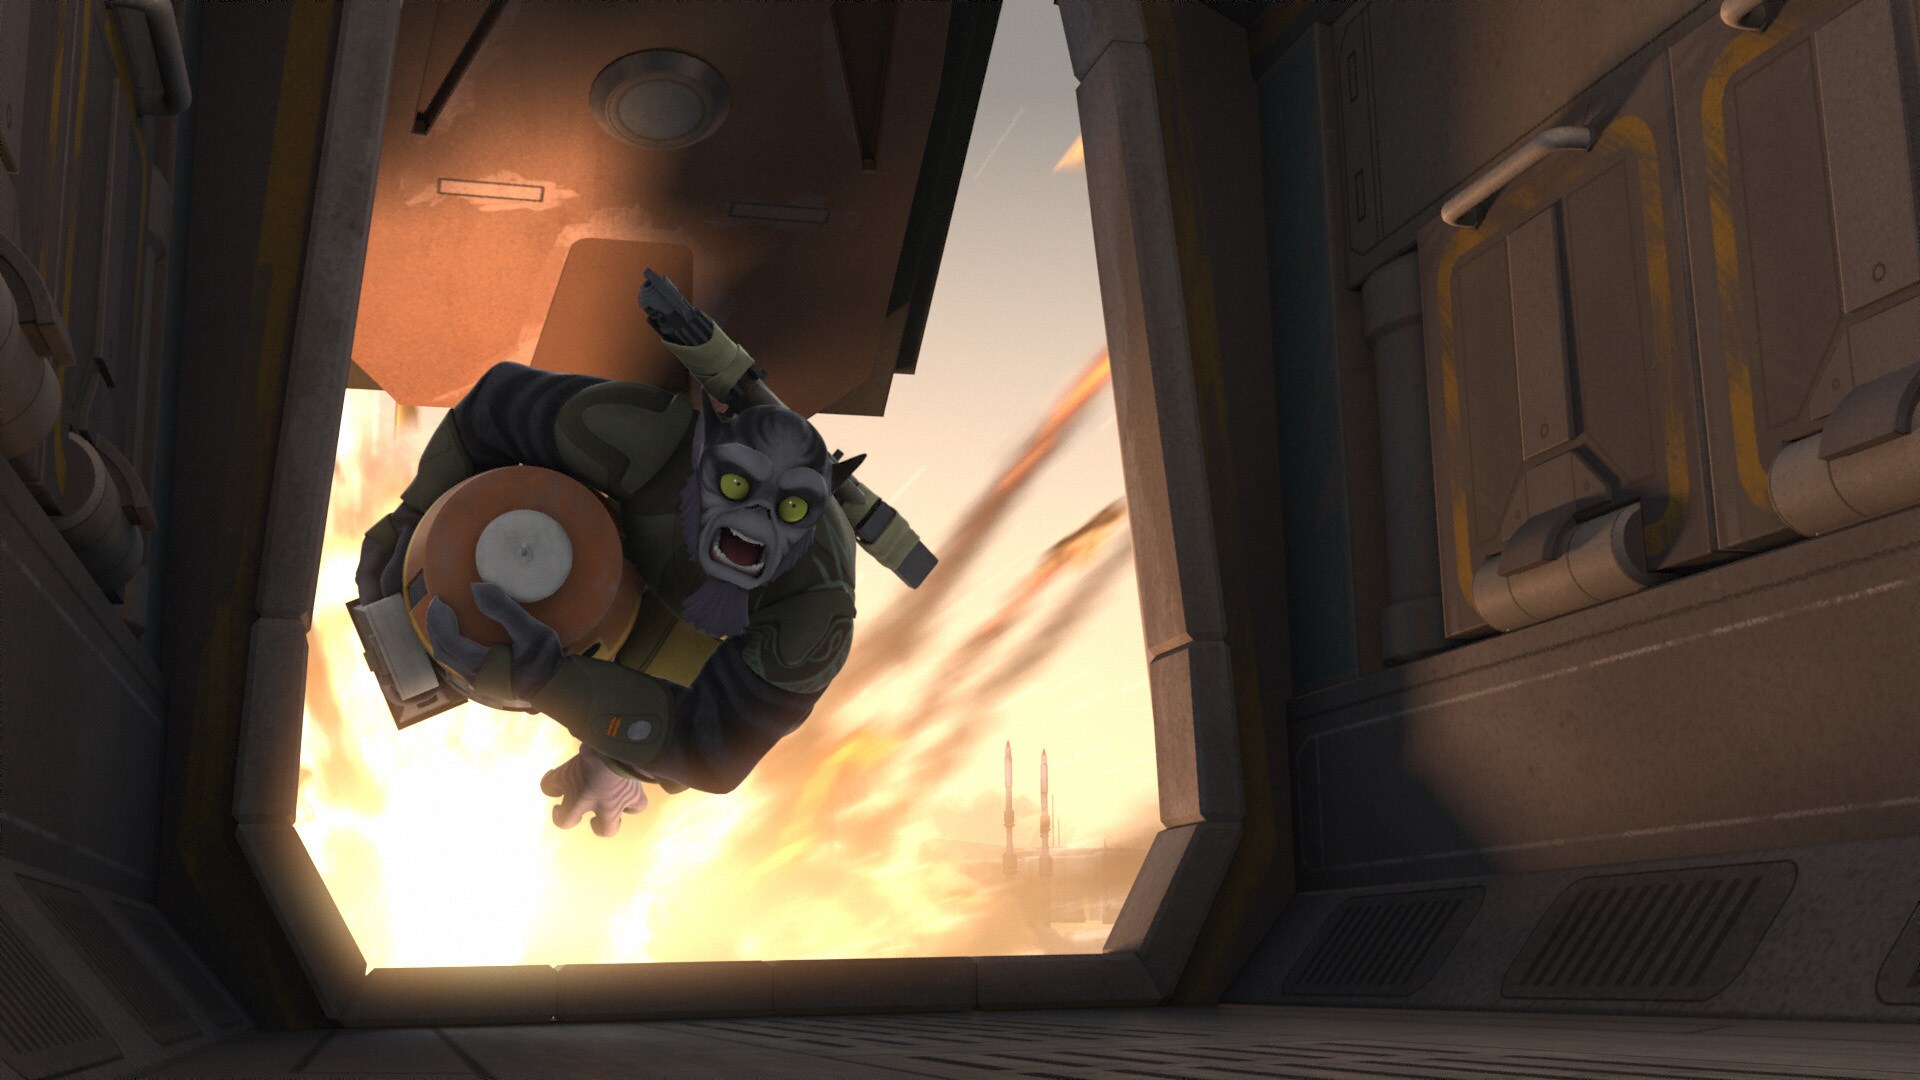 Zeb leaps back to the walker, and grabs the droid just before their walker is destroyed.